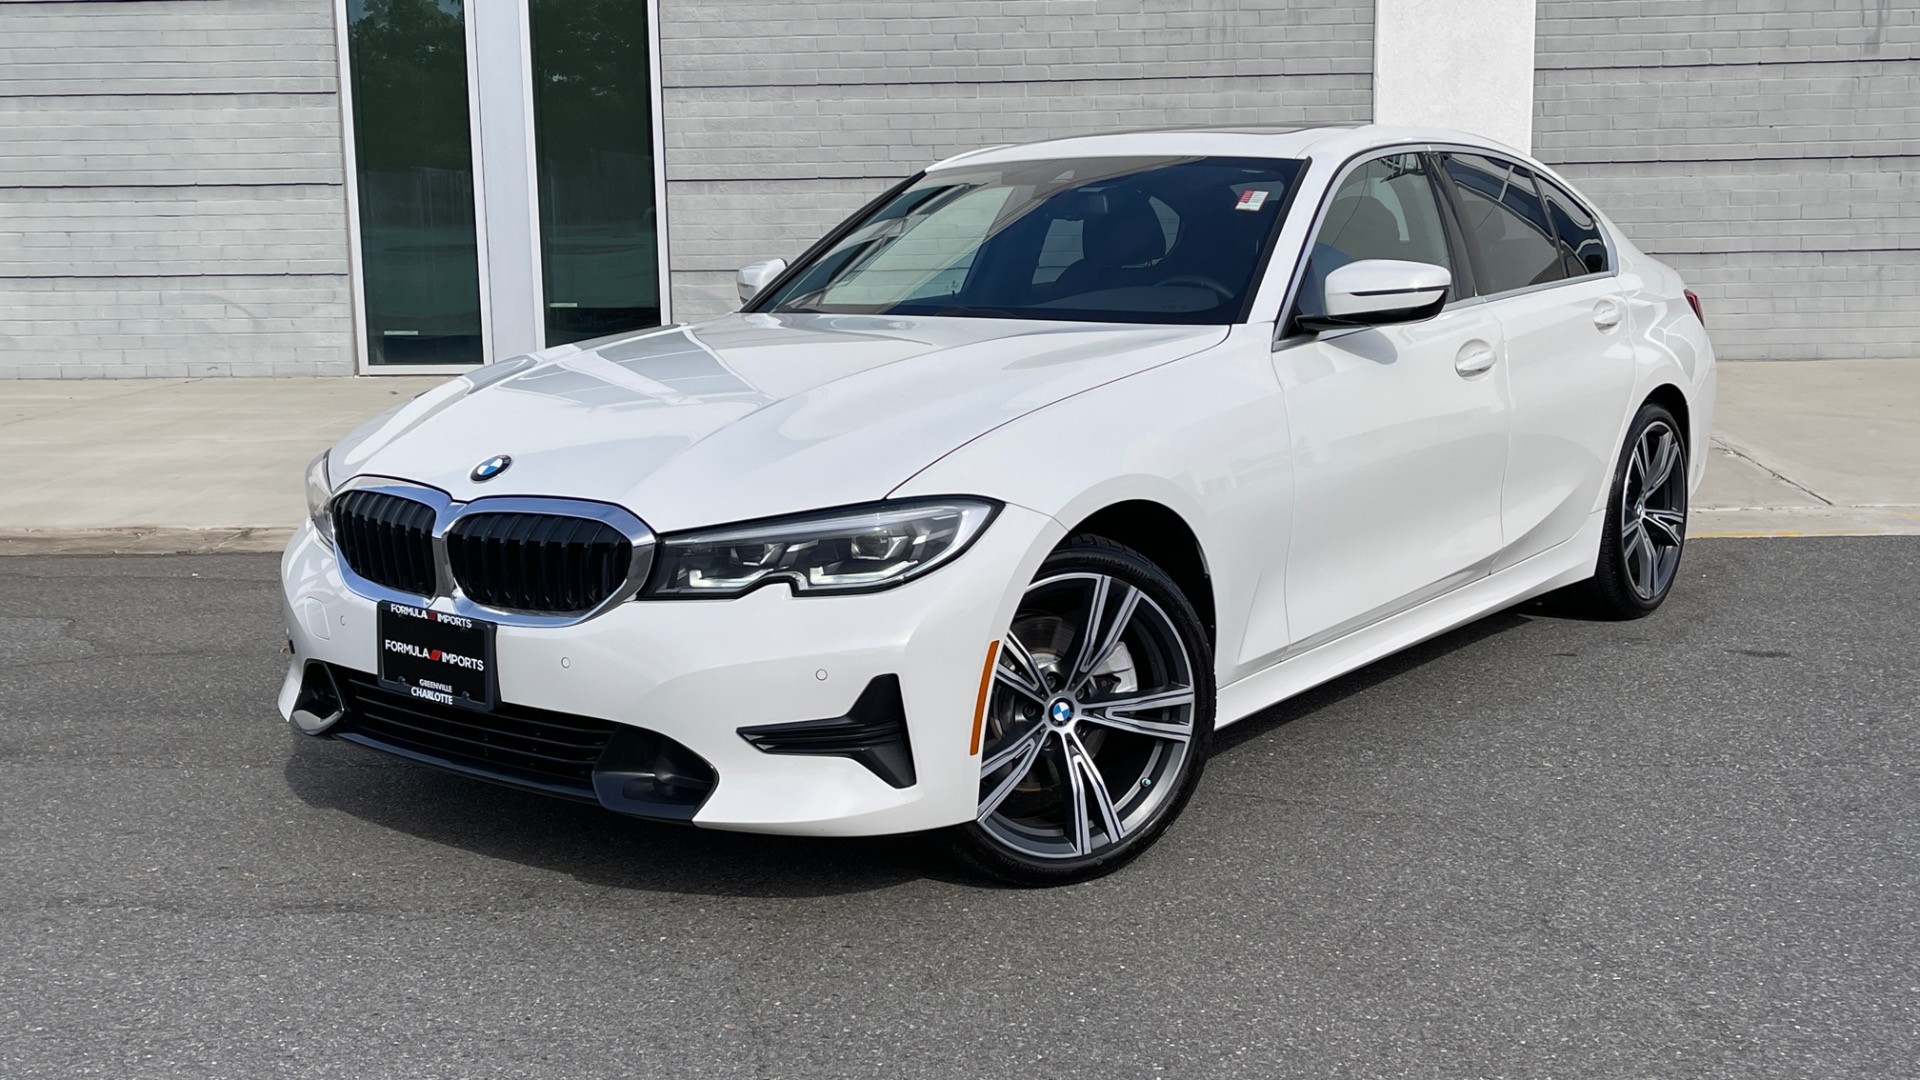 Used 2020 BMW 3 Series 330i xDrive / CONVENIENCE PACKAGE / HEATED STEERING / 19IN WHEELS / KEYLESS for sale $35,795 at Formula Imports in Charlotte NC 28227 1